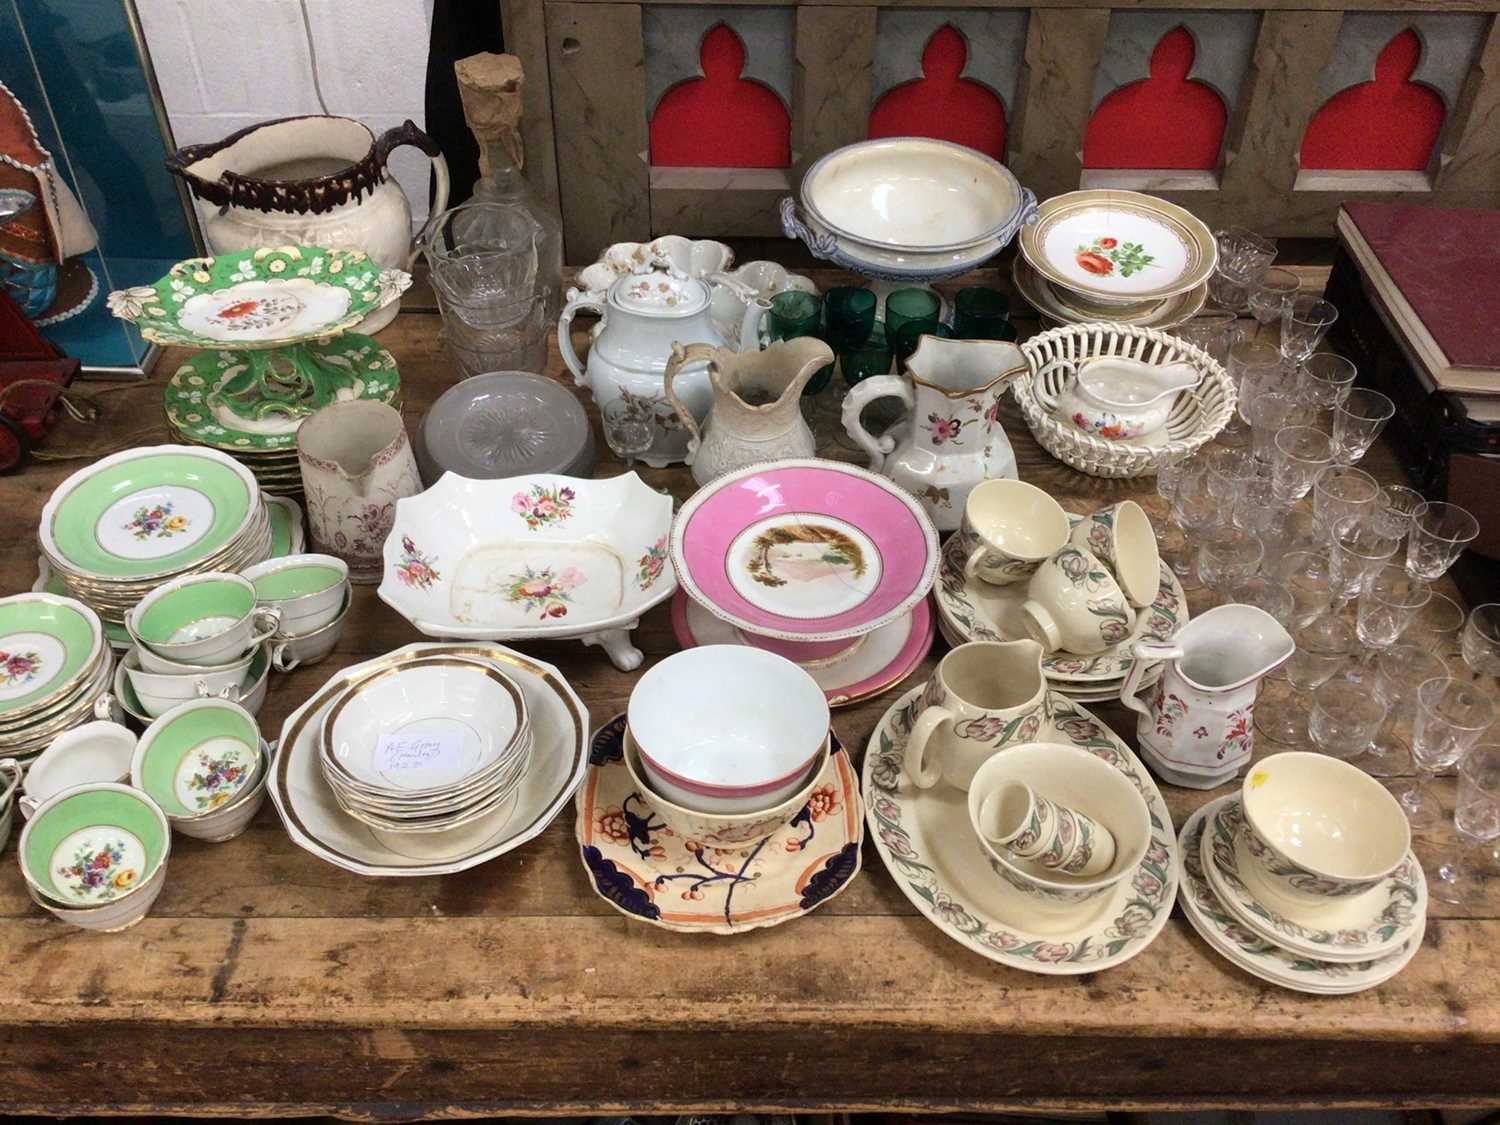 Lot 36 - Collection of 19th century and later ceramics and glass, including Foley, Susie Cooper, etc